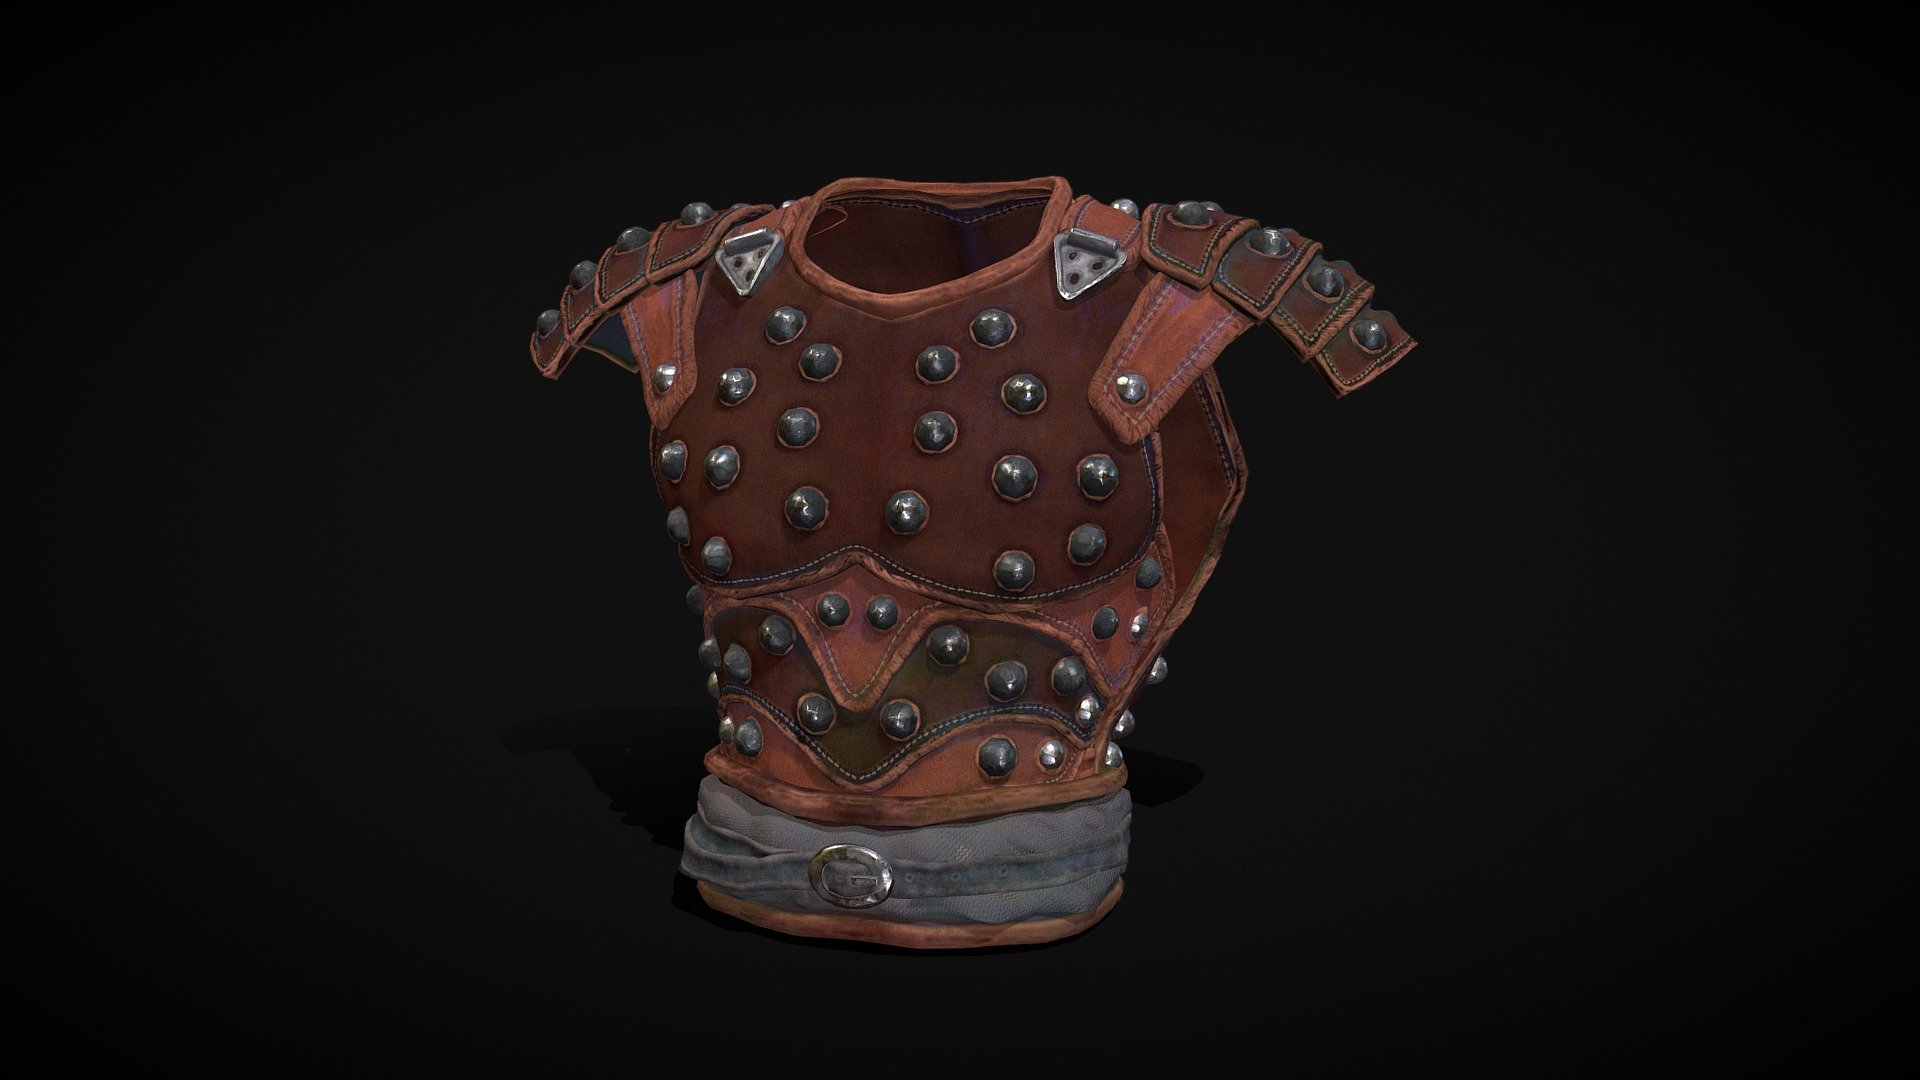 Made for Faes AR an #RPG #AR #Game #app a Studs Thief Armor with #zbrush #Maya #substancepainter and #marmoset if you want commission works for games, 3d print or argames I can do it 3d model